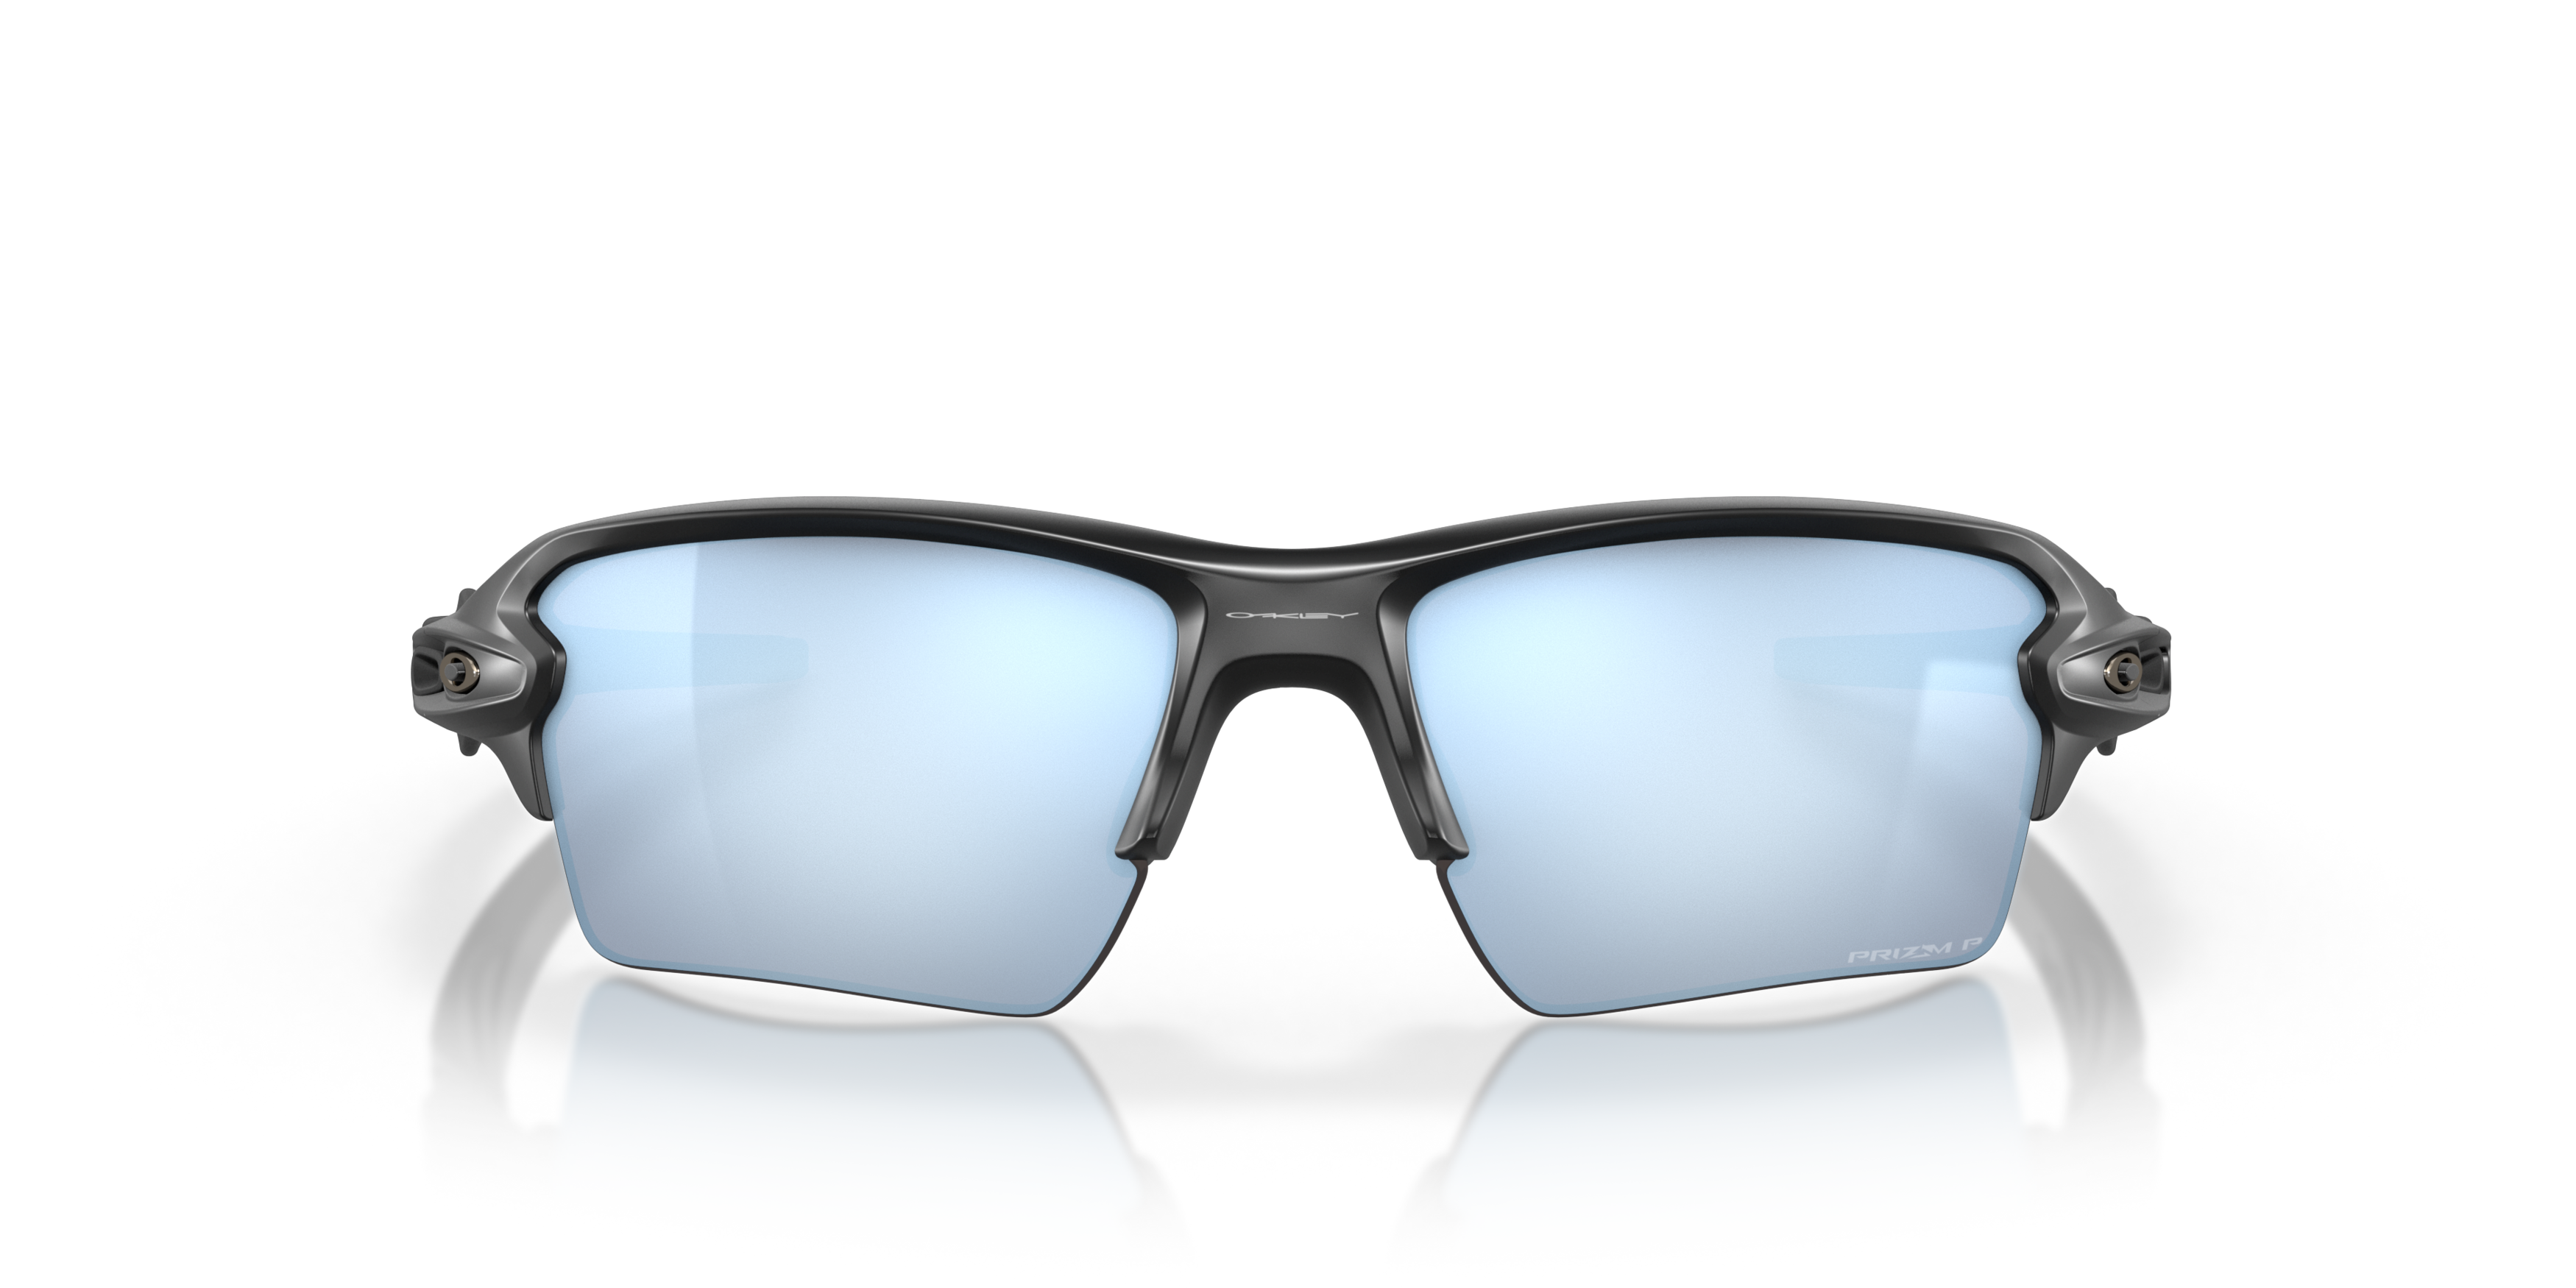 [products.image.front] Oakley FLAK 2.0 XL OO9188 918858